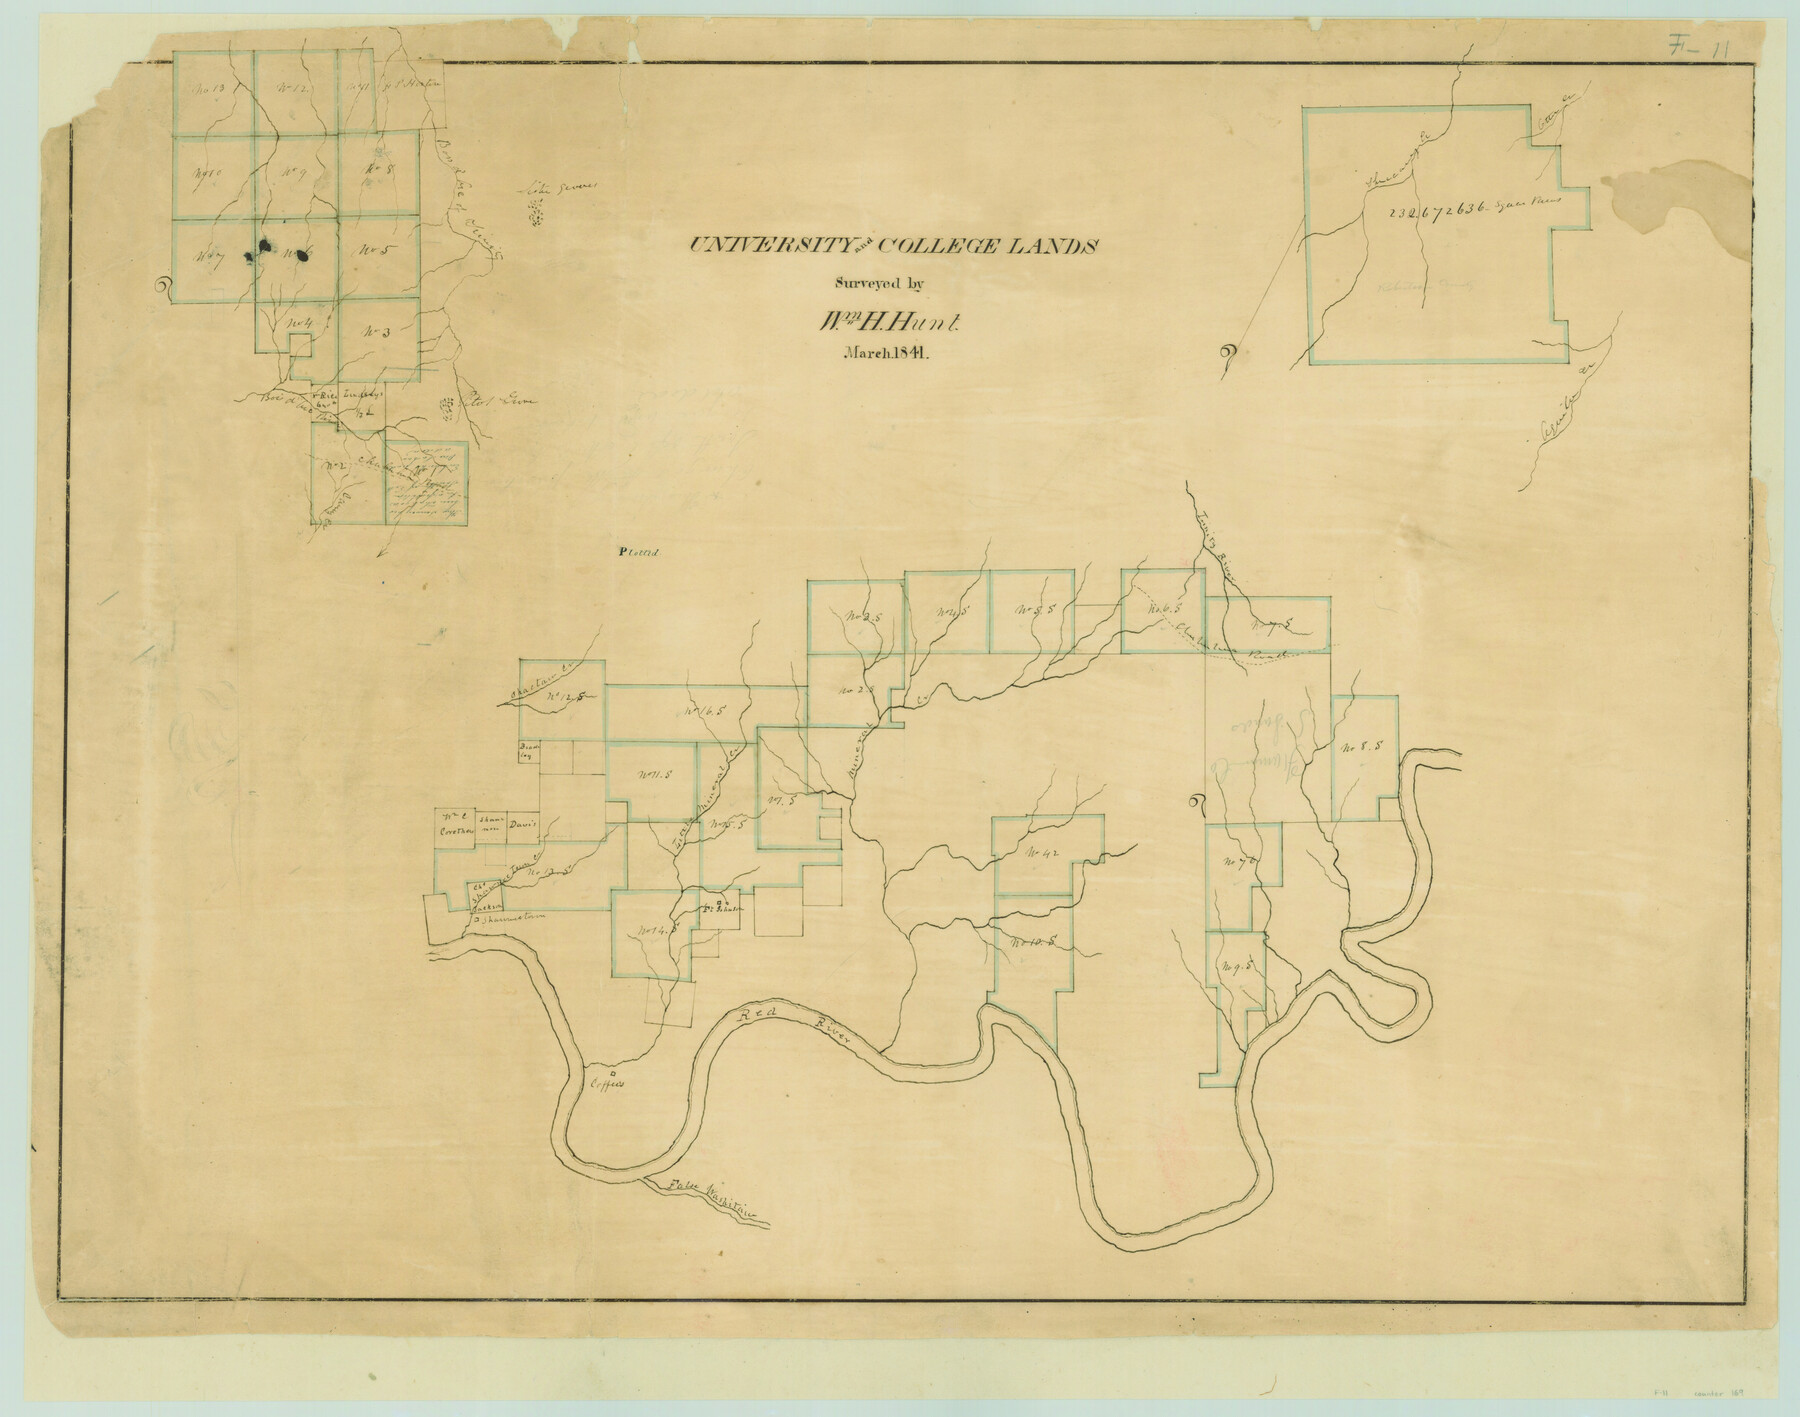 169, University and College Lands, General Map Collection